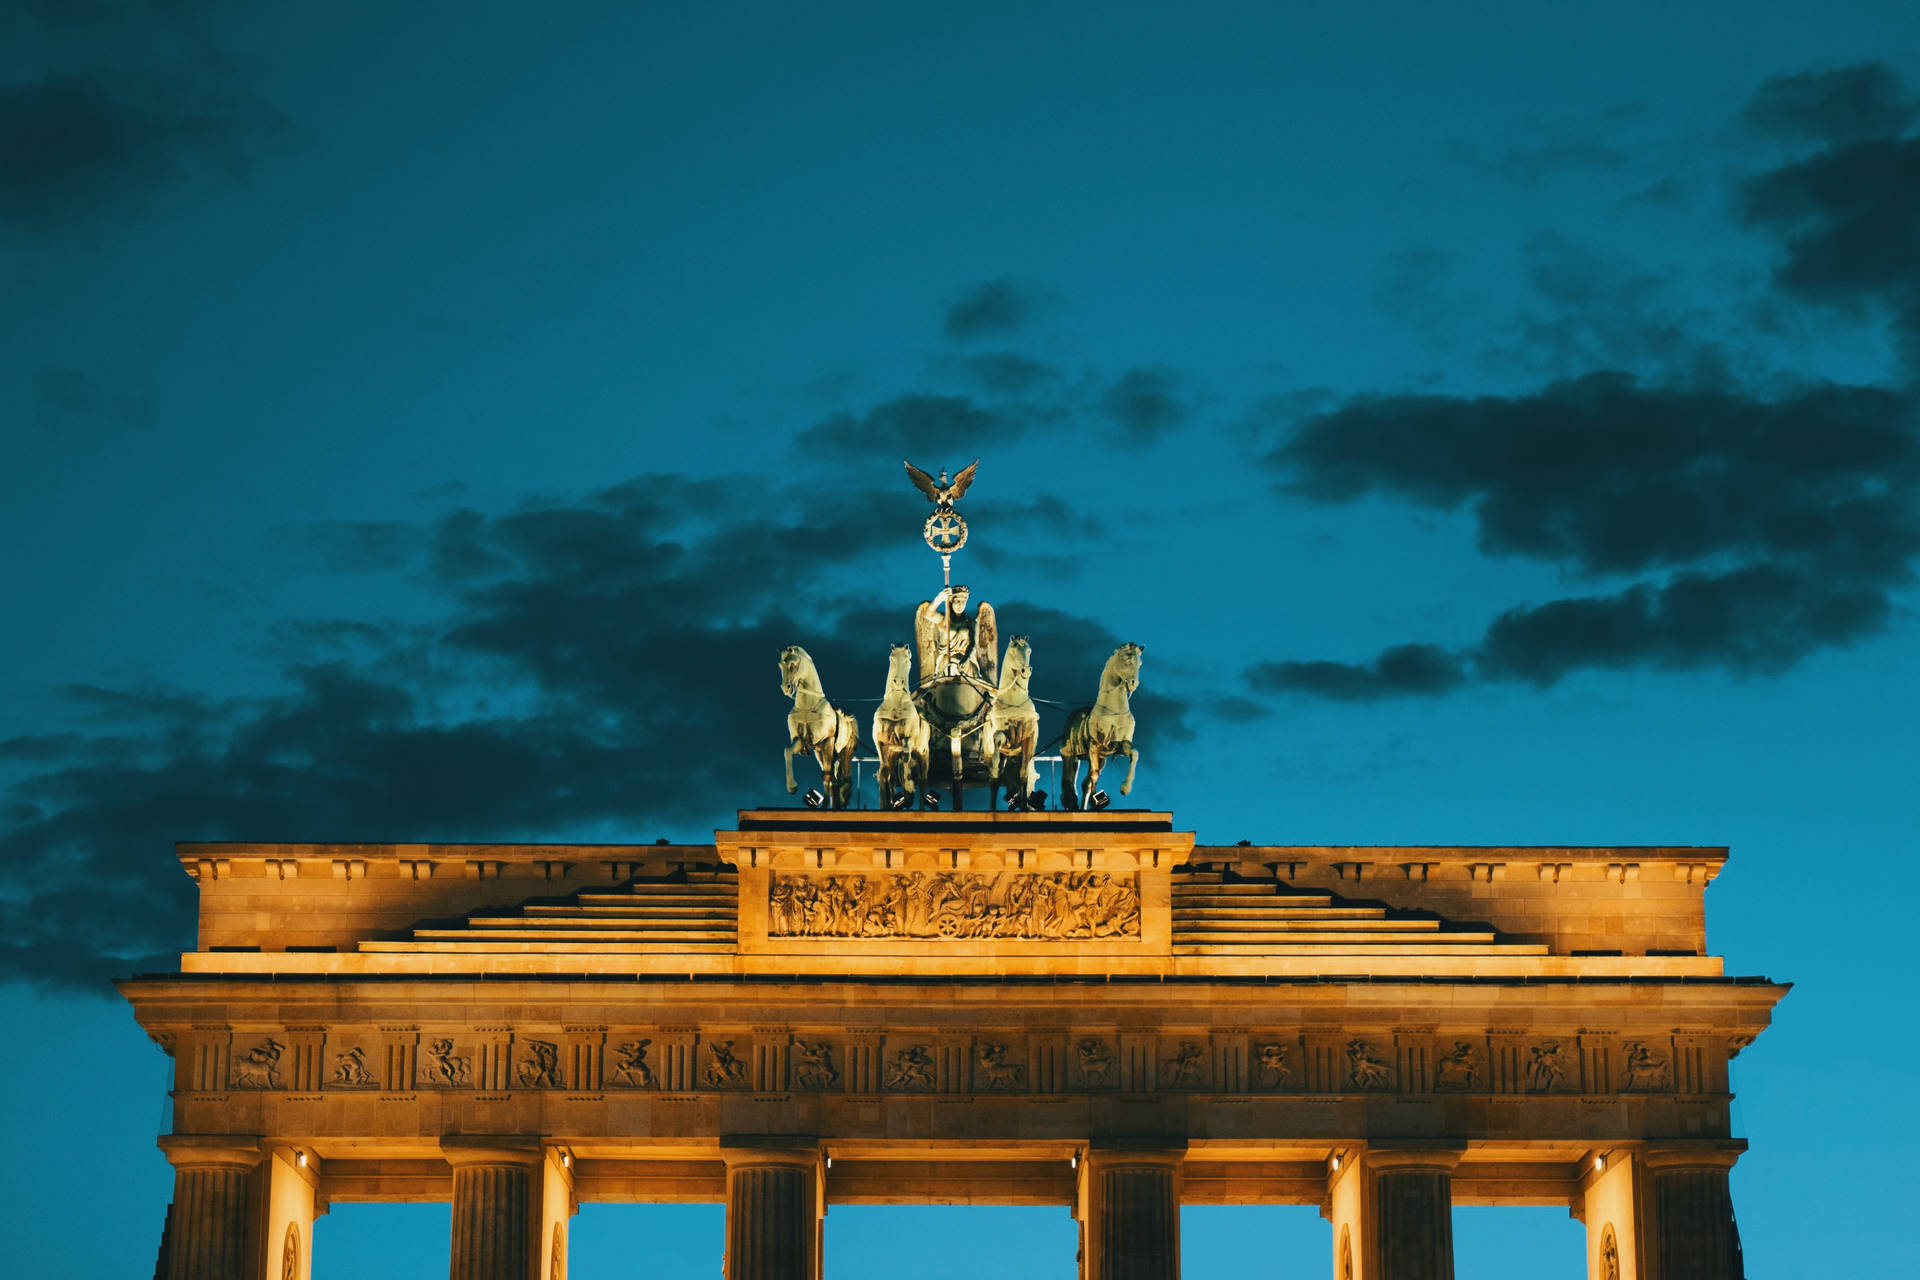 The Berlin Monument Germany Wallpaper